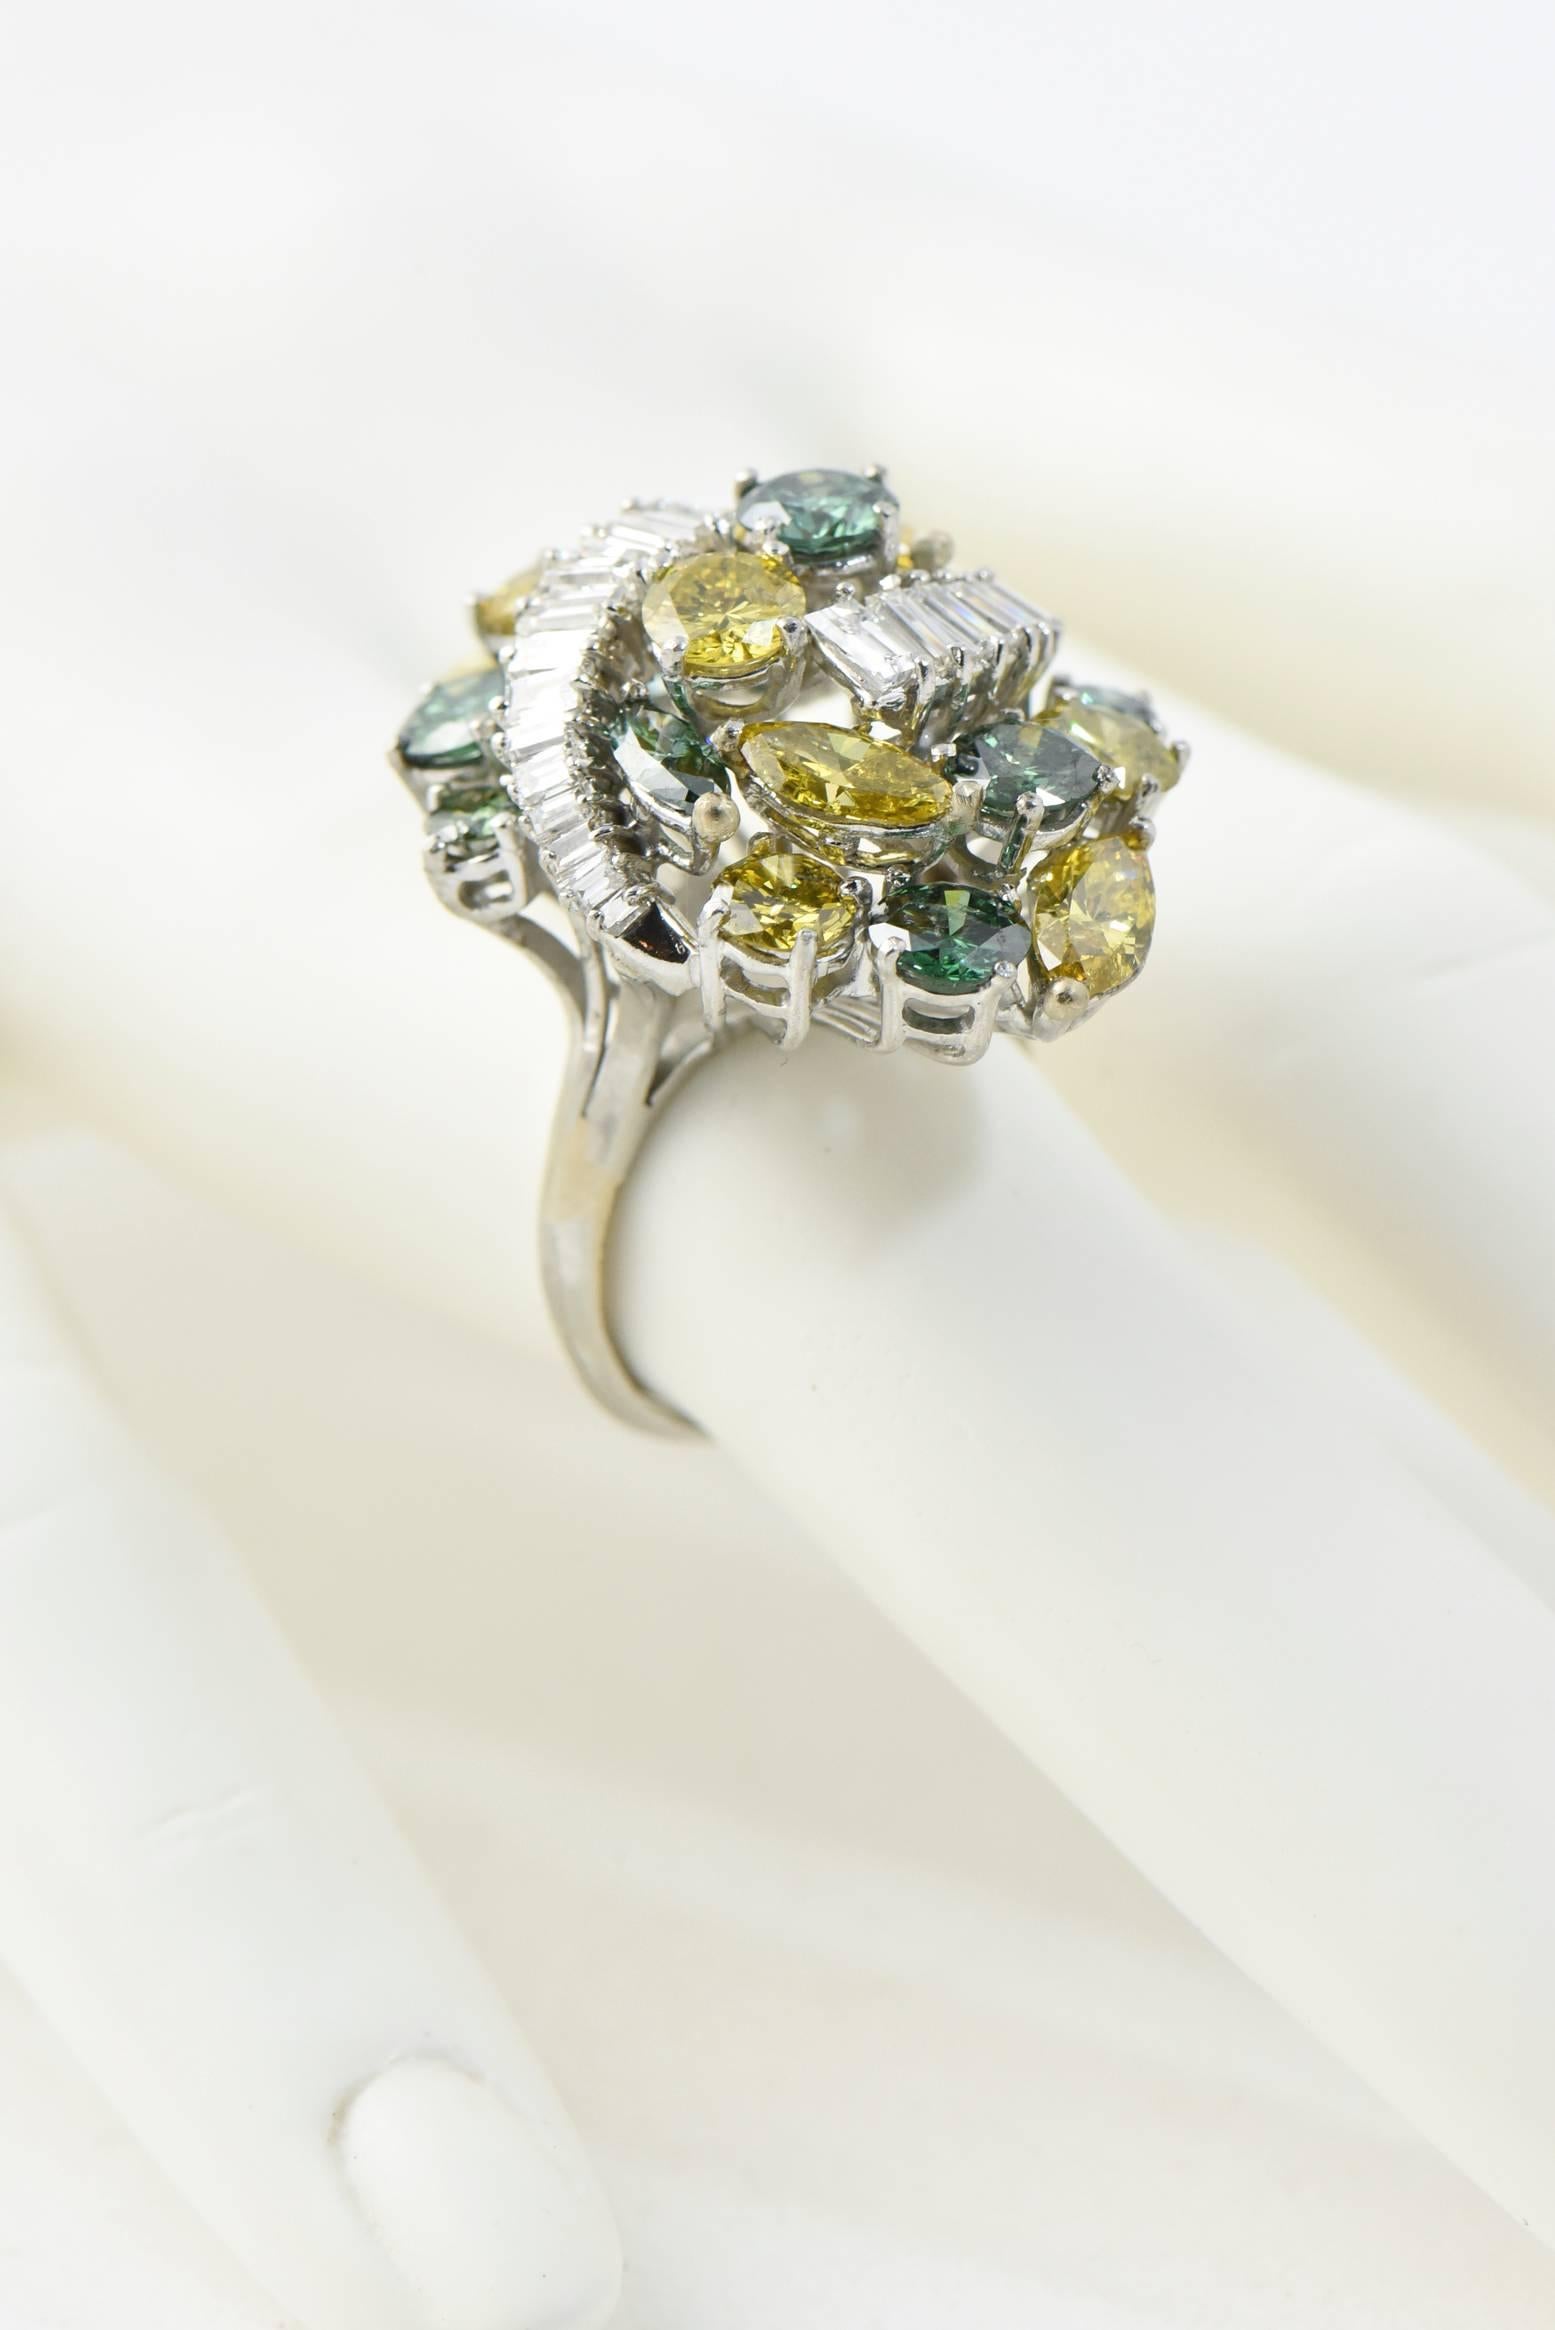 Impressive treated and near colorless diamond cocktail ring set with a cluster of circular and marquis-cut treated yellow and green diamonds accented by graduated baguette - cut near colorless diamond arches mounted in platinum.  The approximate